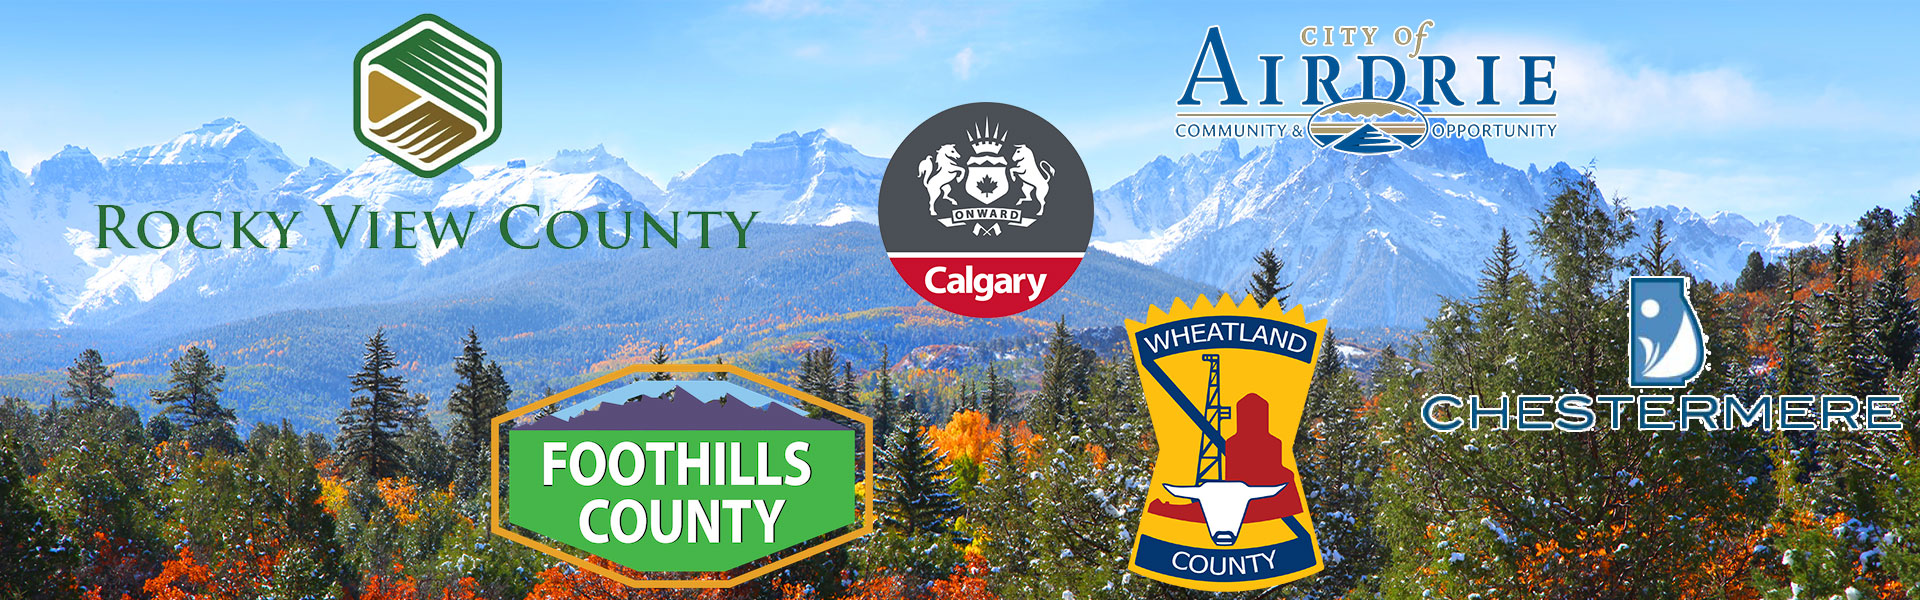 Affordable Airdrie Web concentrates on Airdrie and all locations within Rocky View County, Alberta.